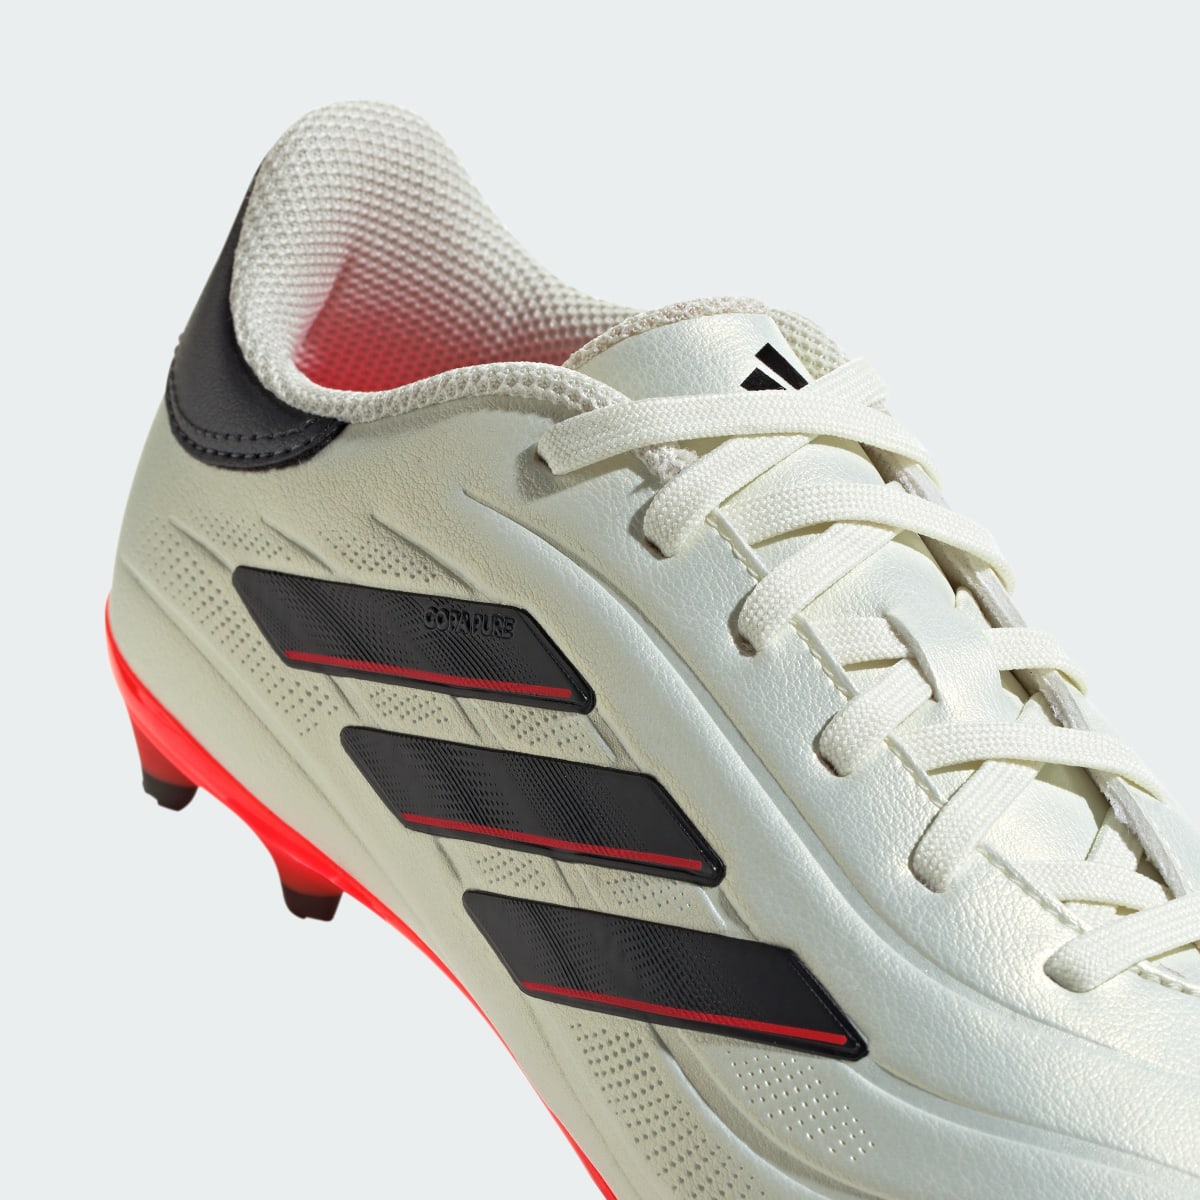 Adidas Copa Pure II League Firm Ground Cleats. 10